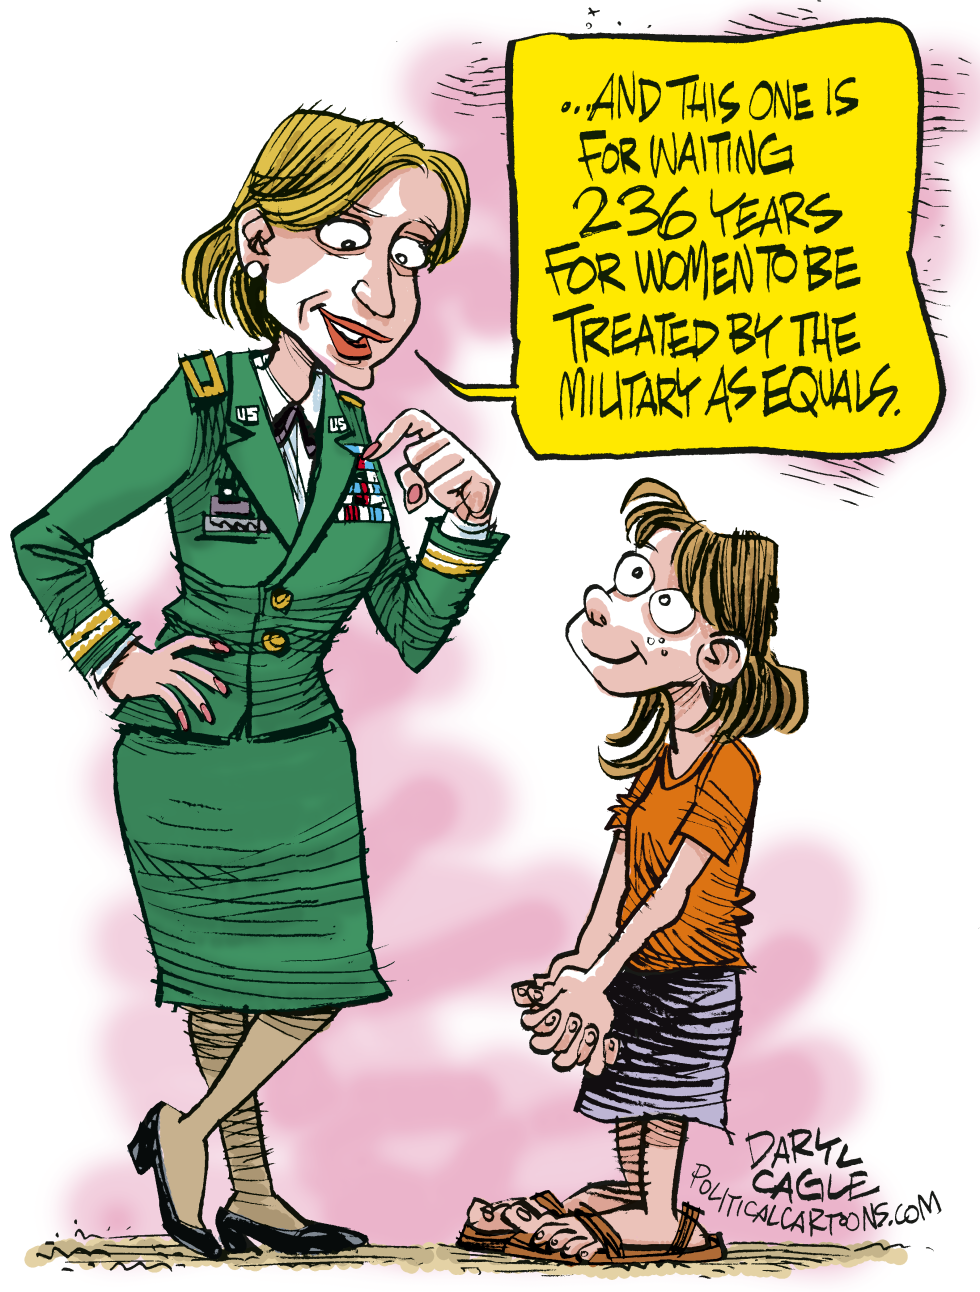 WOMEN IN COMBAT  by Daryl Cagle